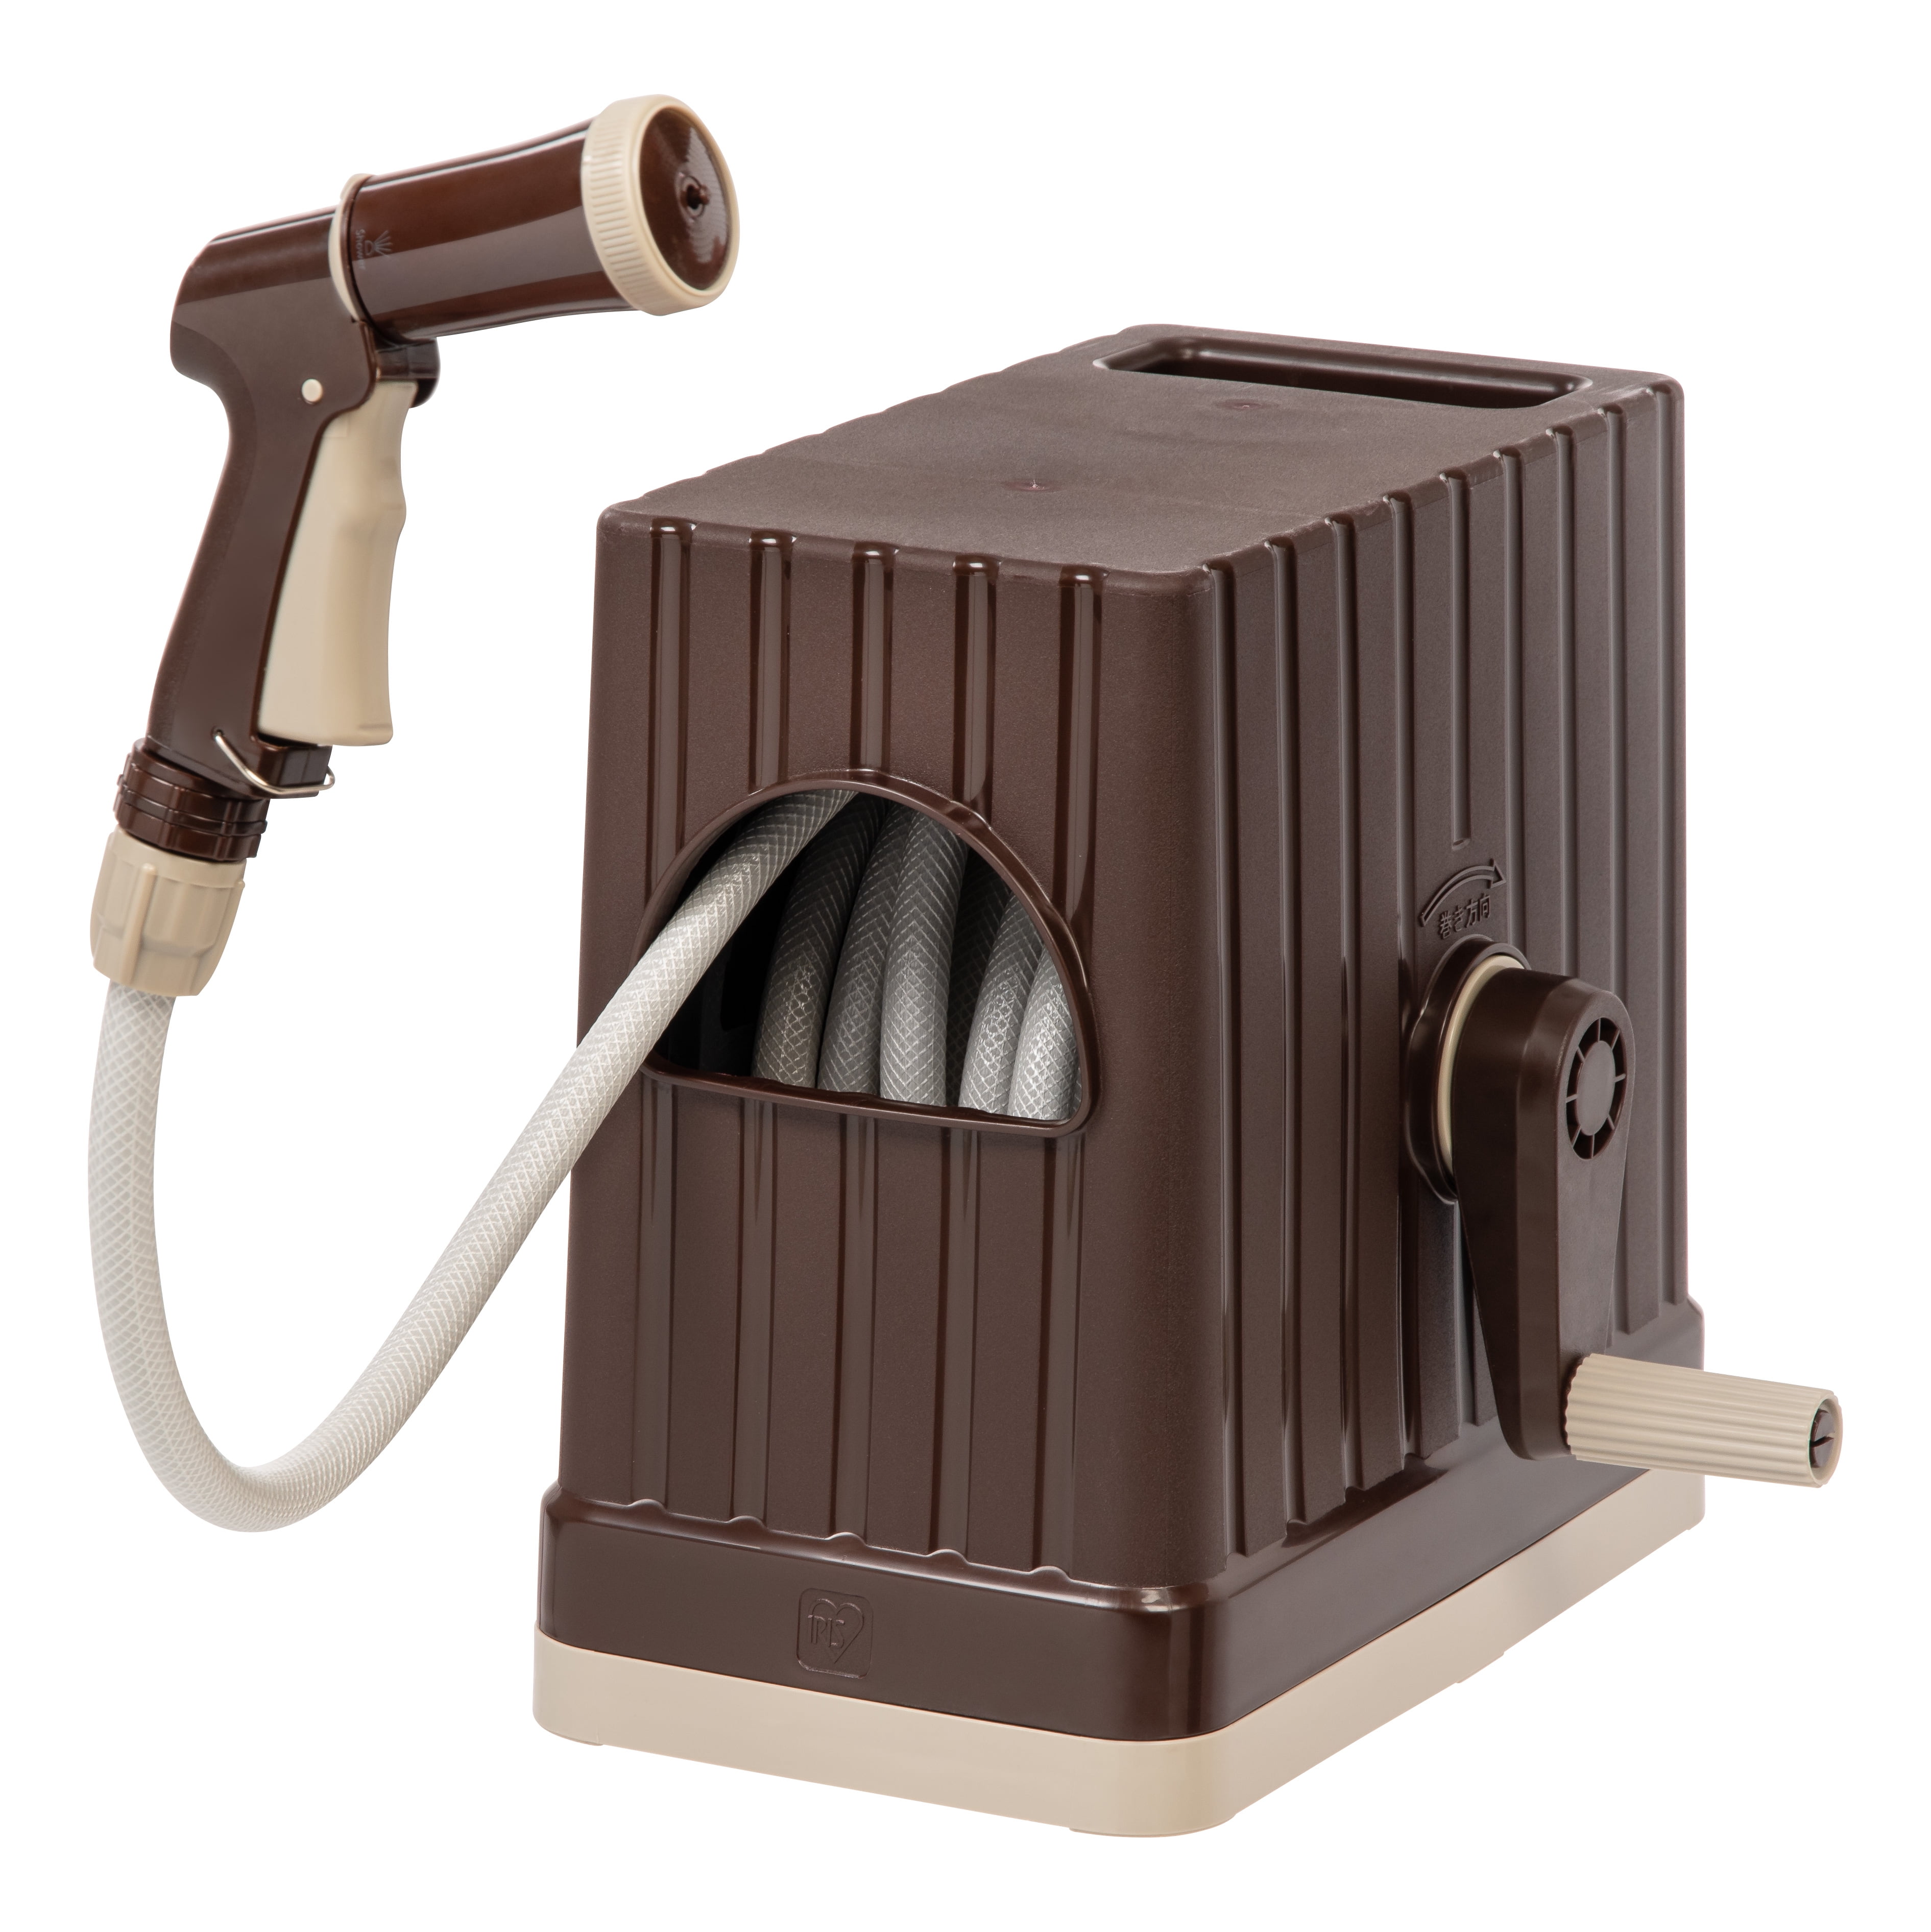 IRIS USA 65 ft Hose Reel with Nozzle, Brown 